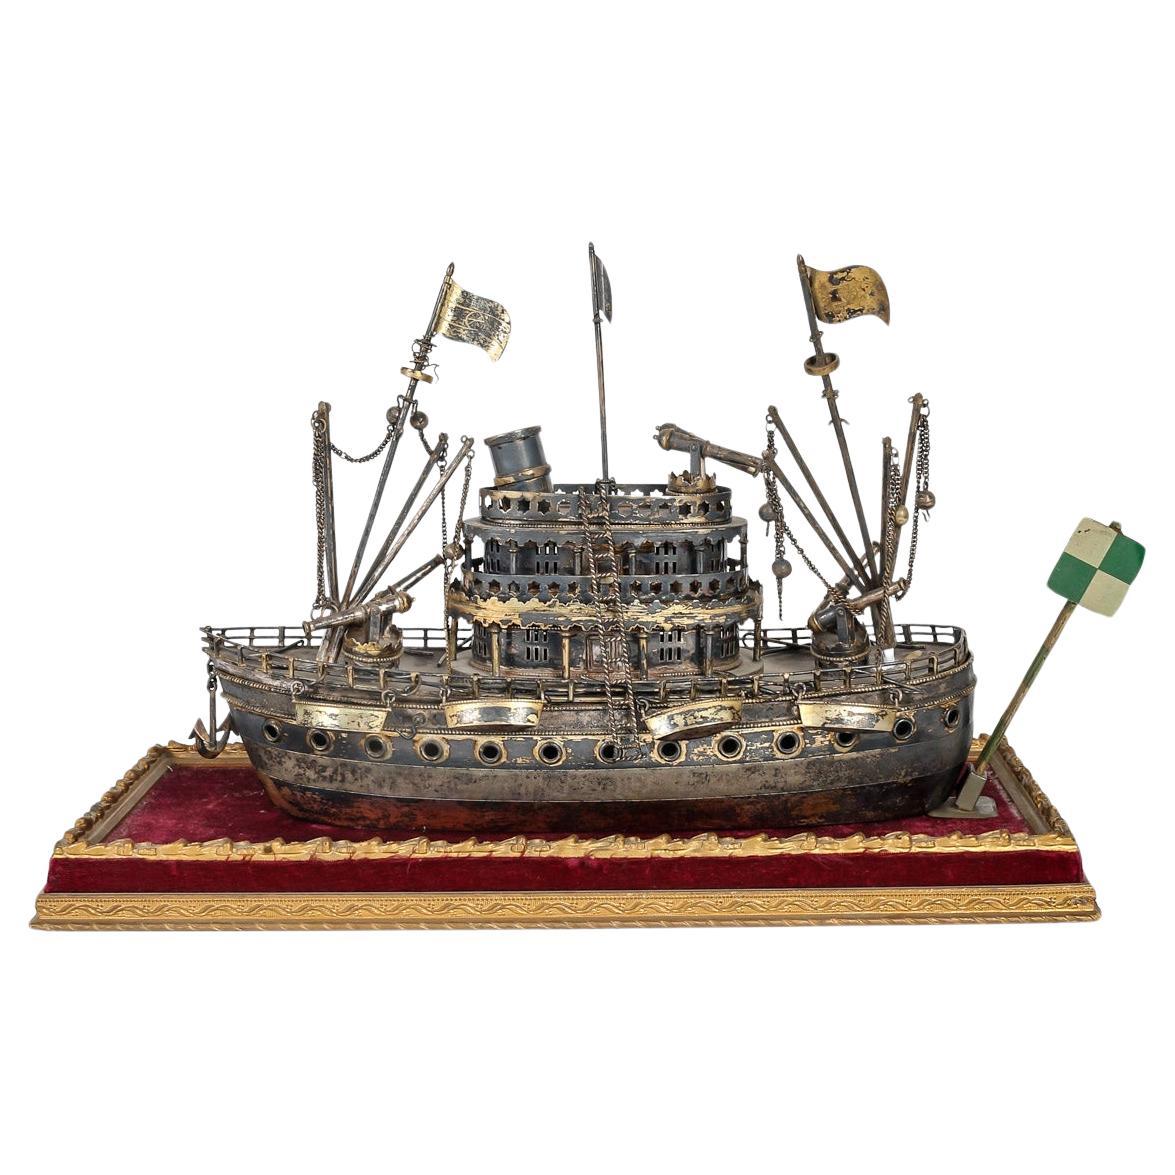 Miniature Army Boat in Sterling Silver, 19th Century, English Work. For Sale